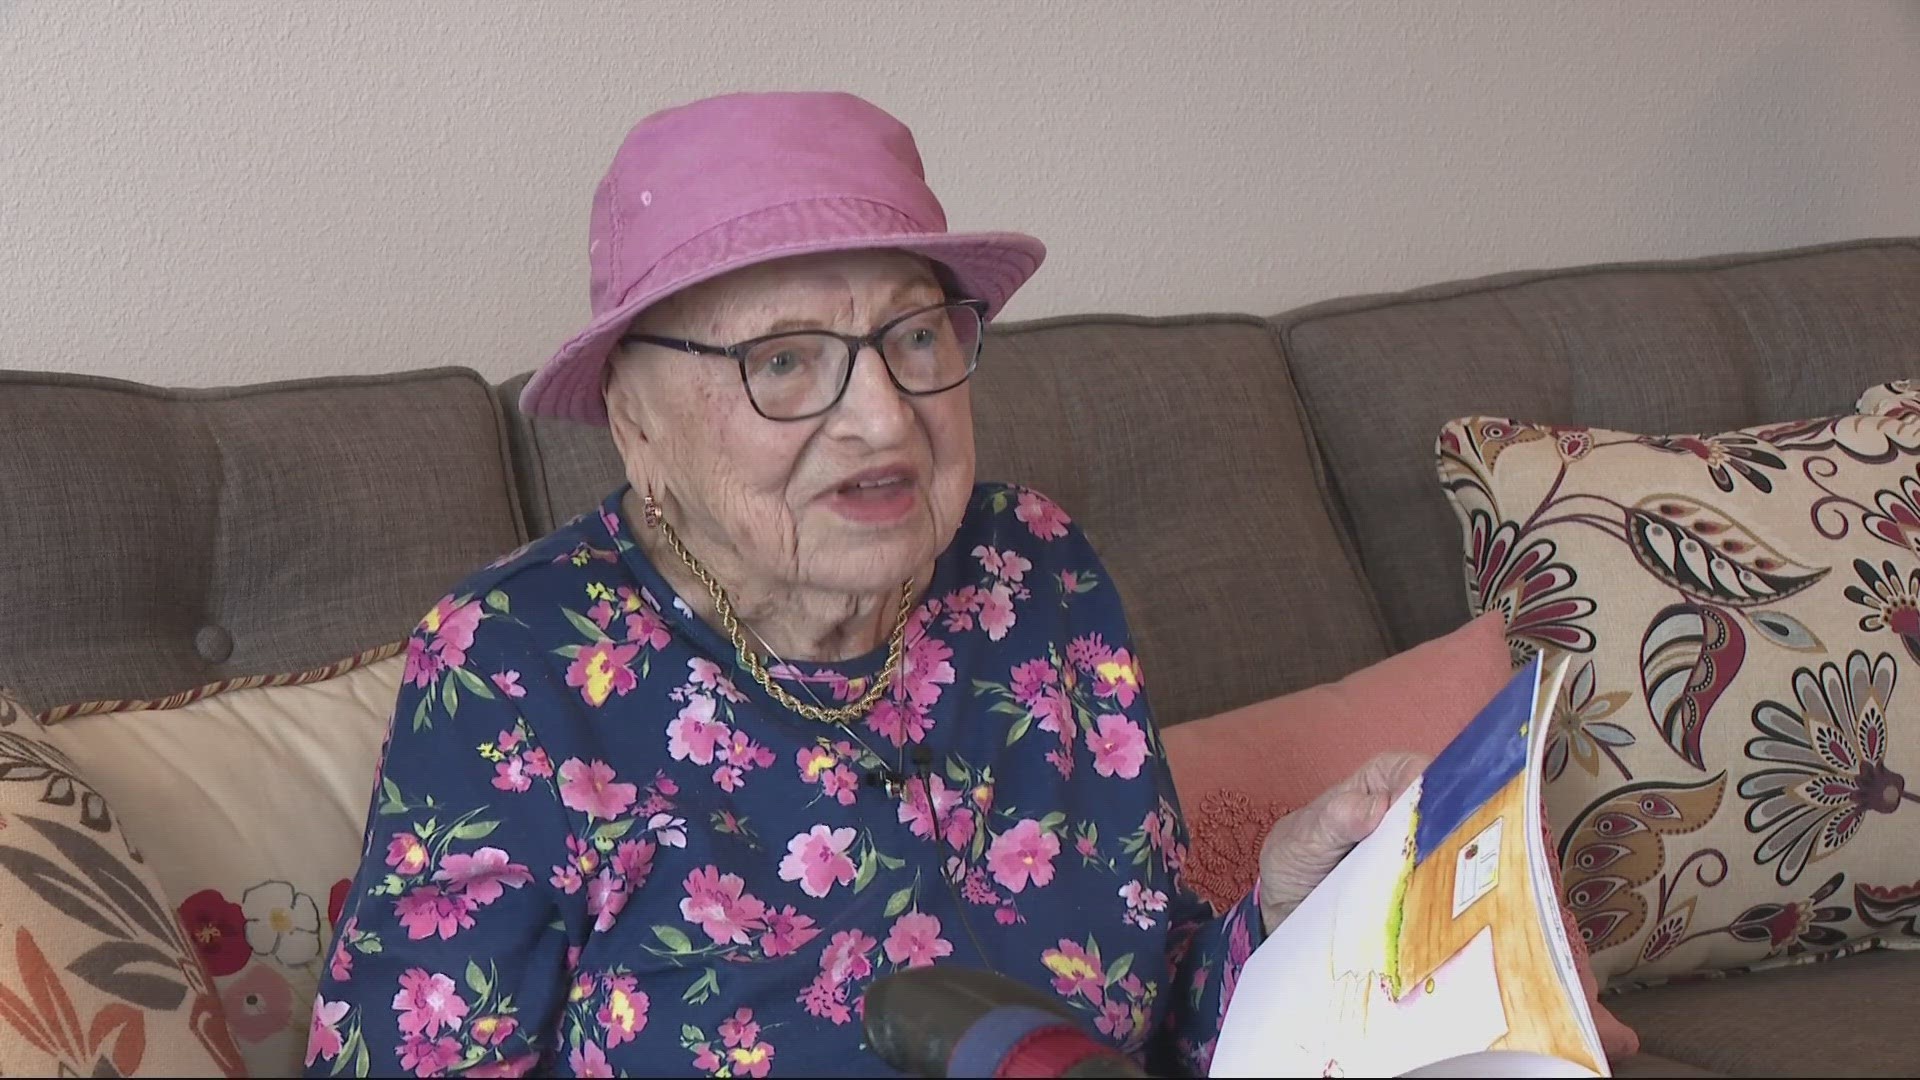 Sigrid Scully has done many things in her life and she recently added another achievement. She published a children's book, "If I Could," at the age of 96 years old.